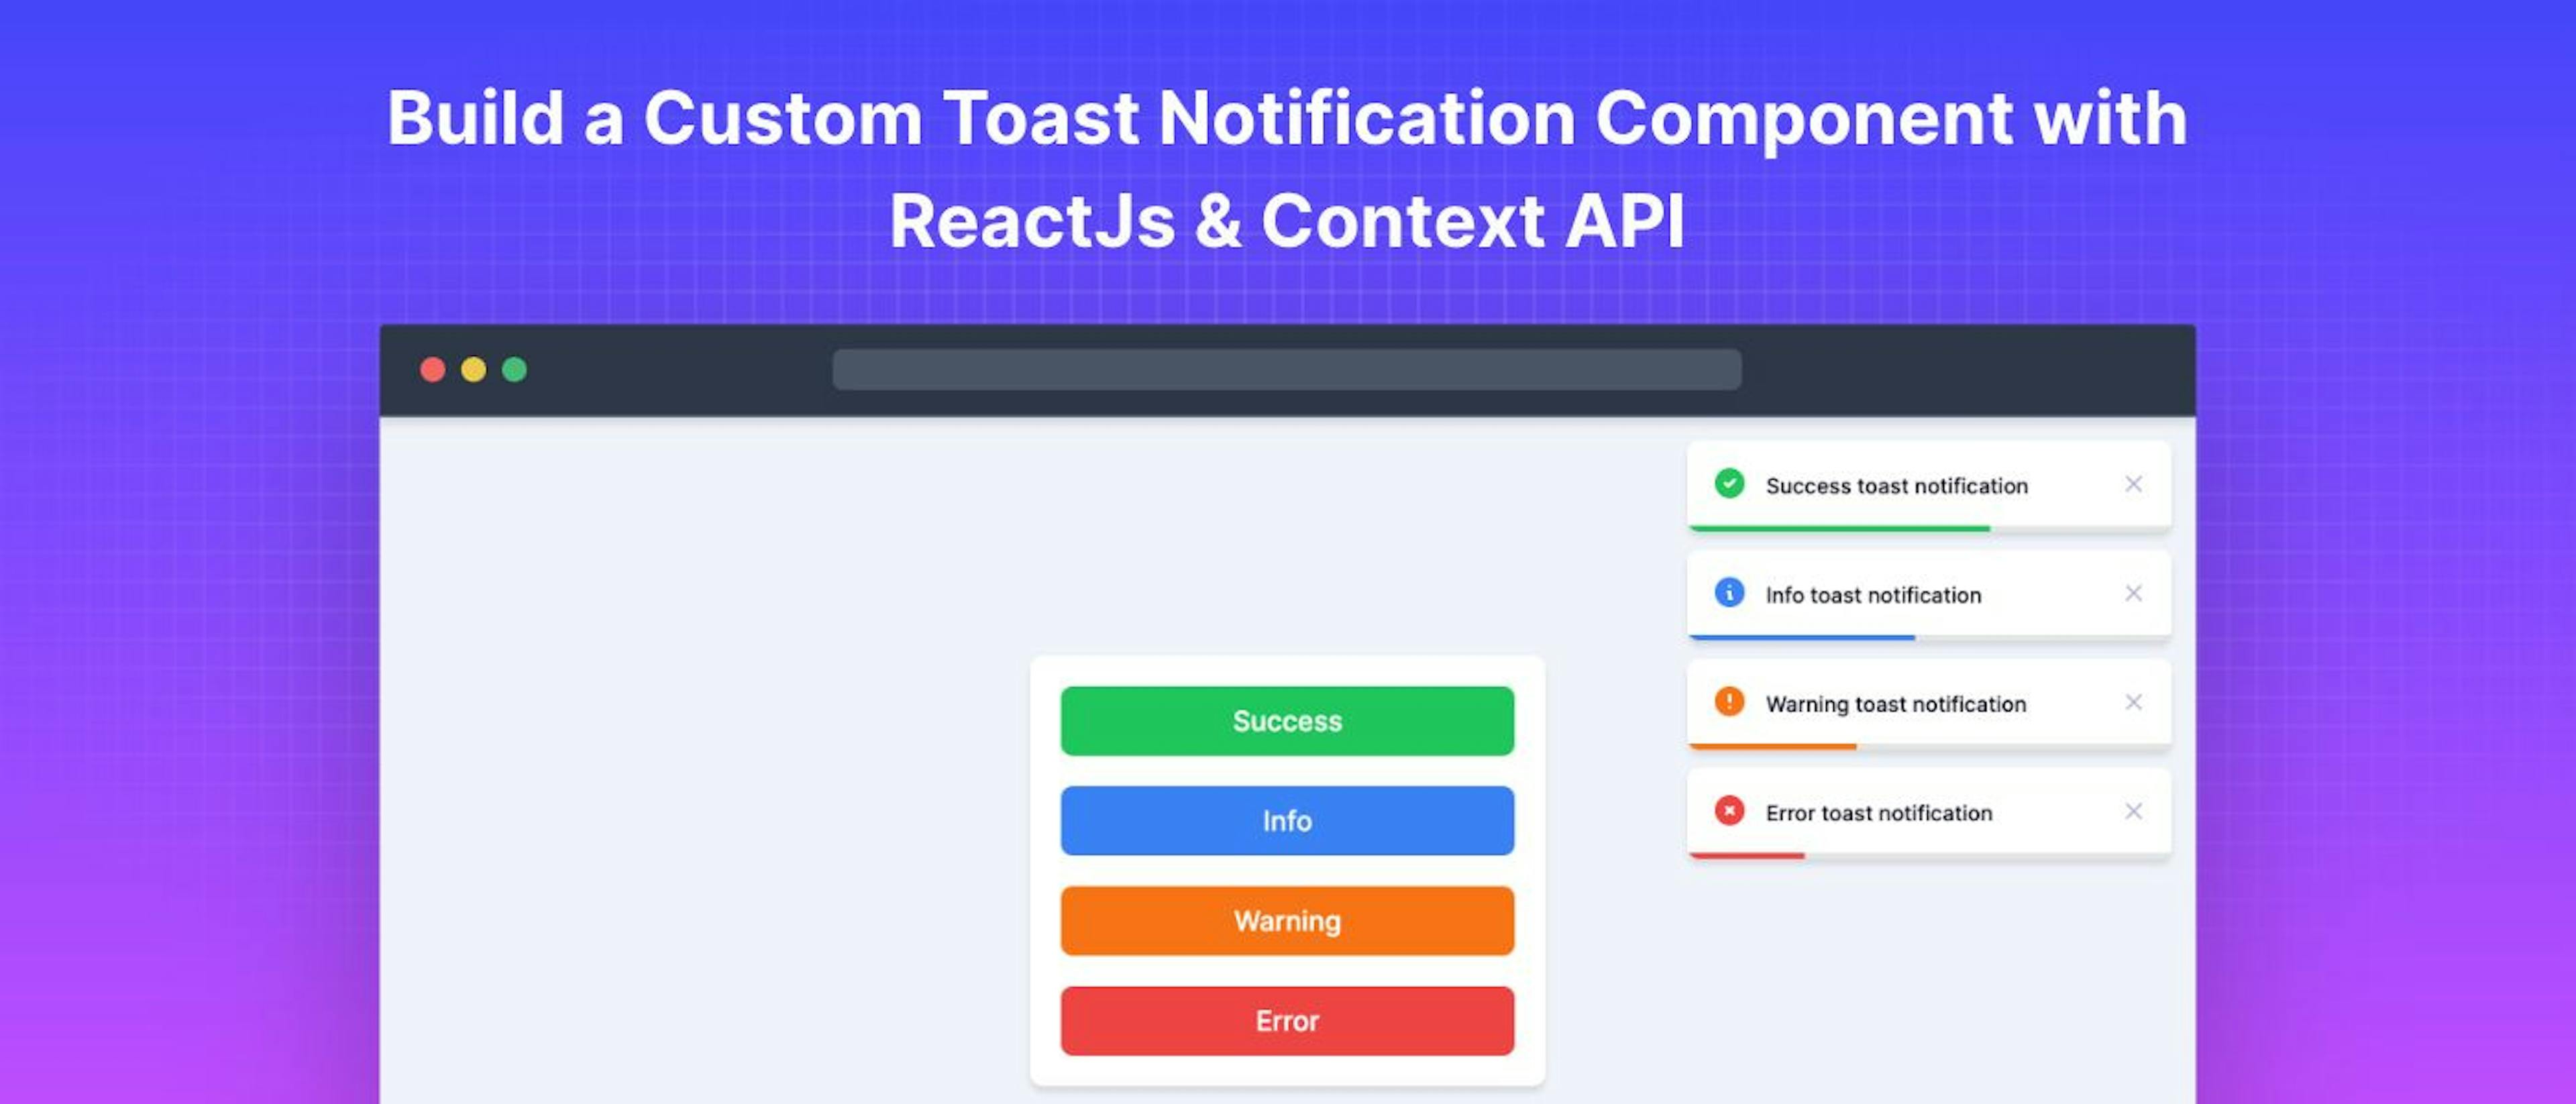 featured image - Using ReactJS and Context API to Build a Custom Toast Notification Component